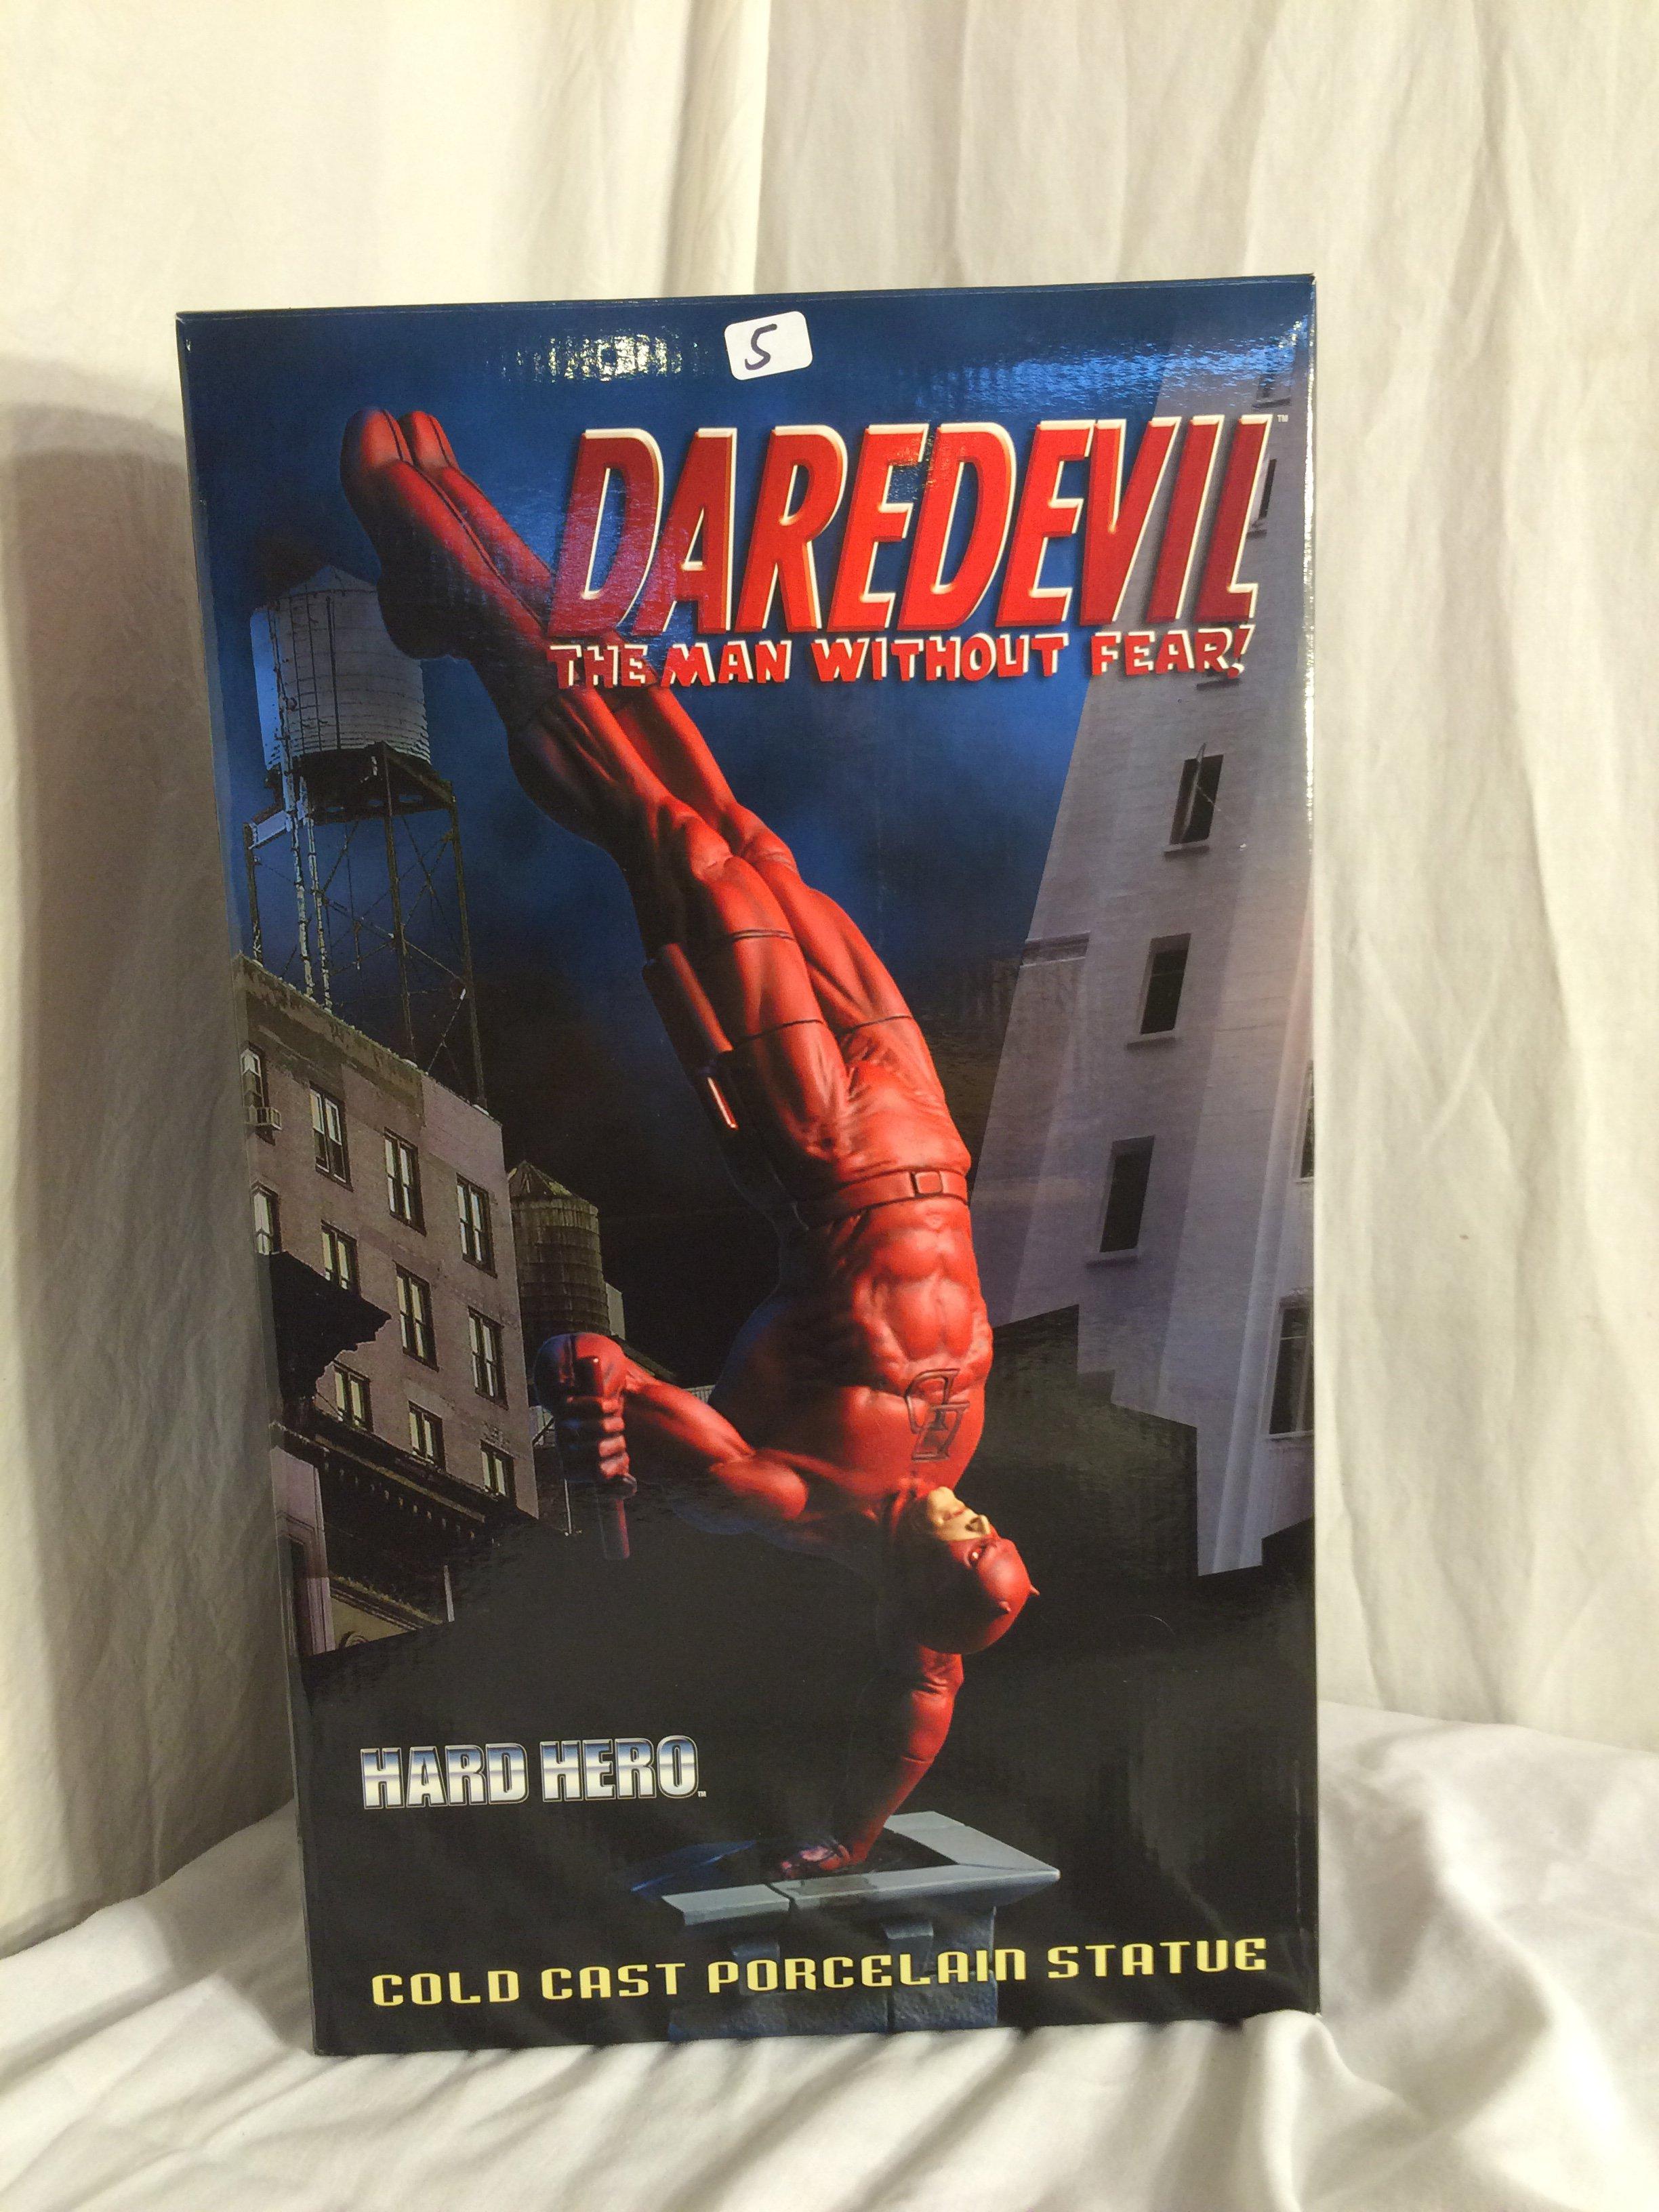 New Marvel Collectibles Daredevil the man without fear Cold-Cast Porcelain Statue  Hard Hero 17.5"B